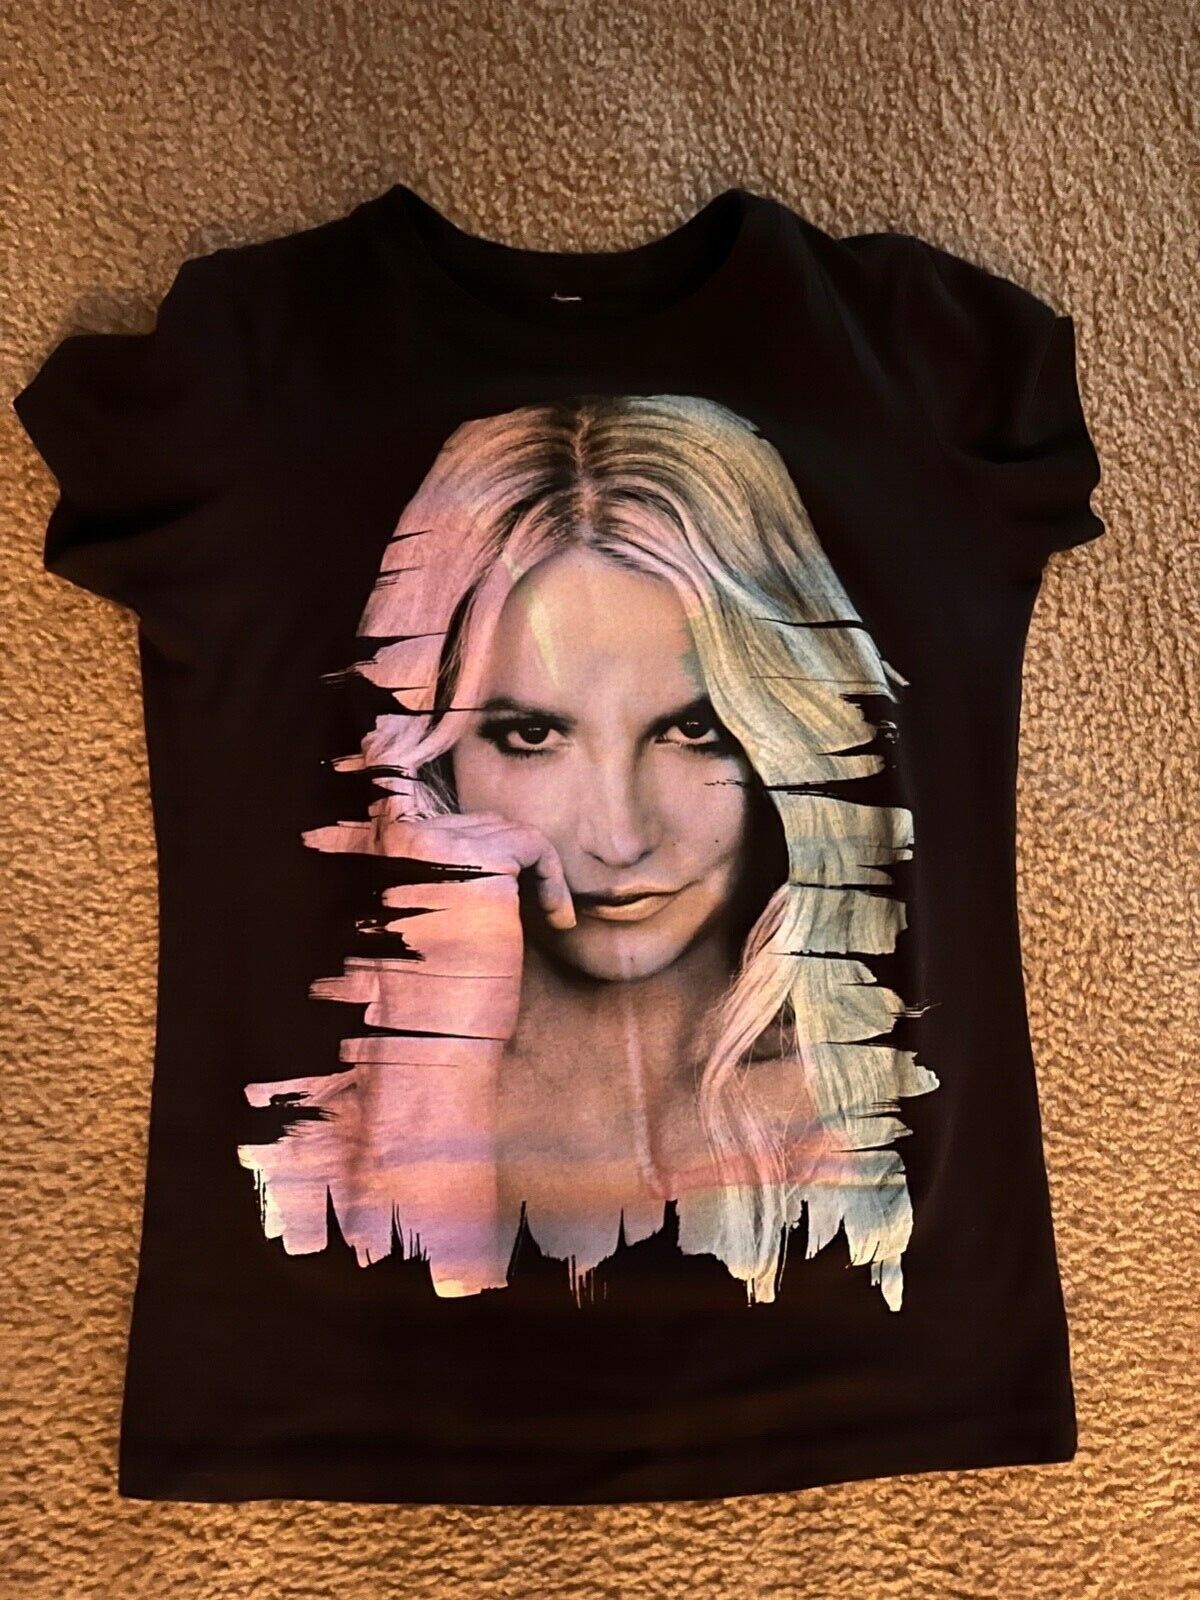 Britney Jean spears T-shirt small Las Vegas planet hollywood